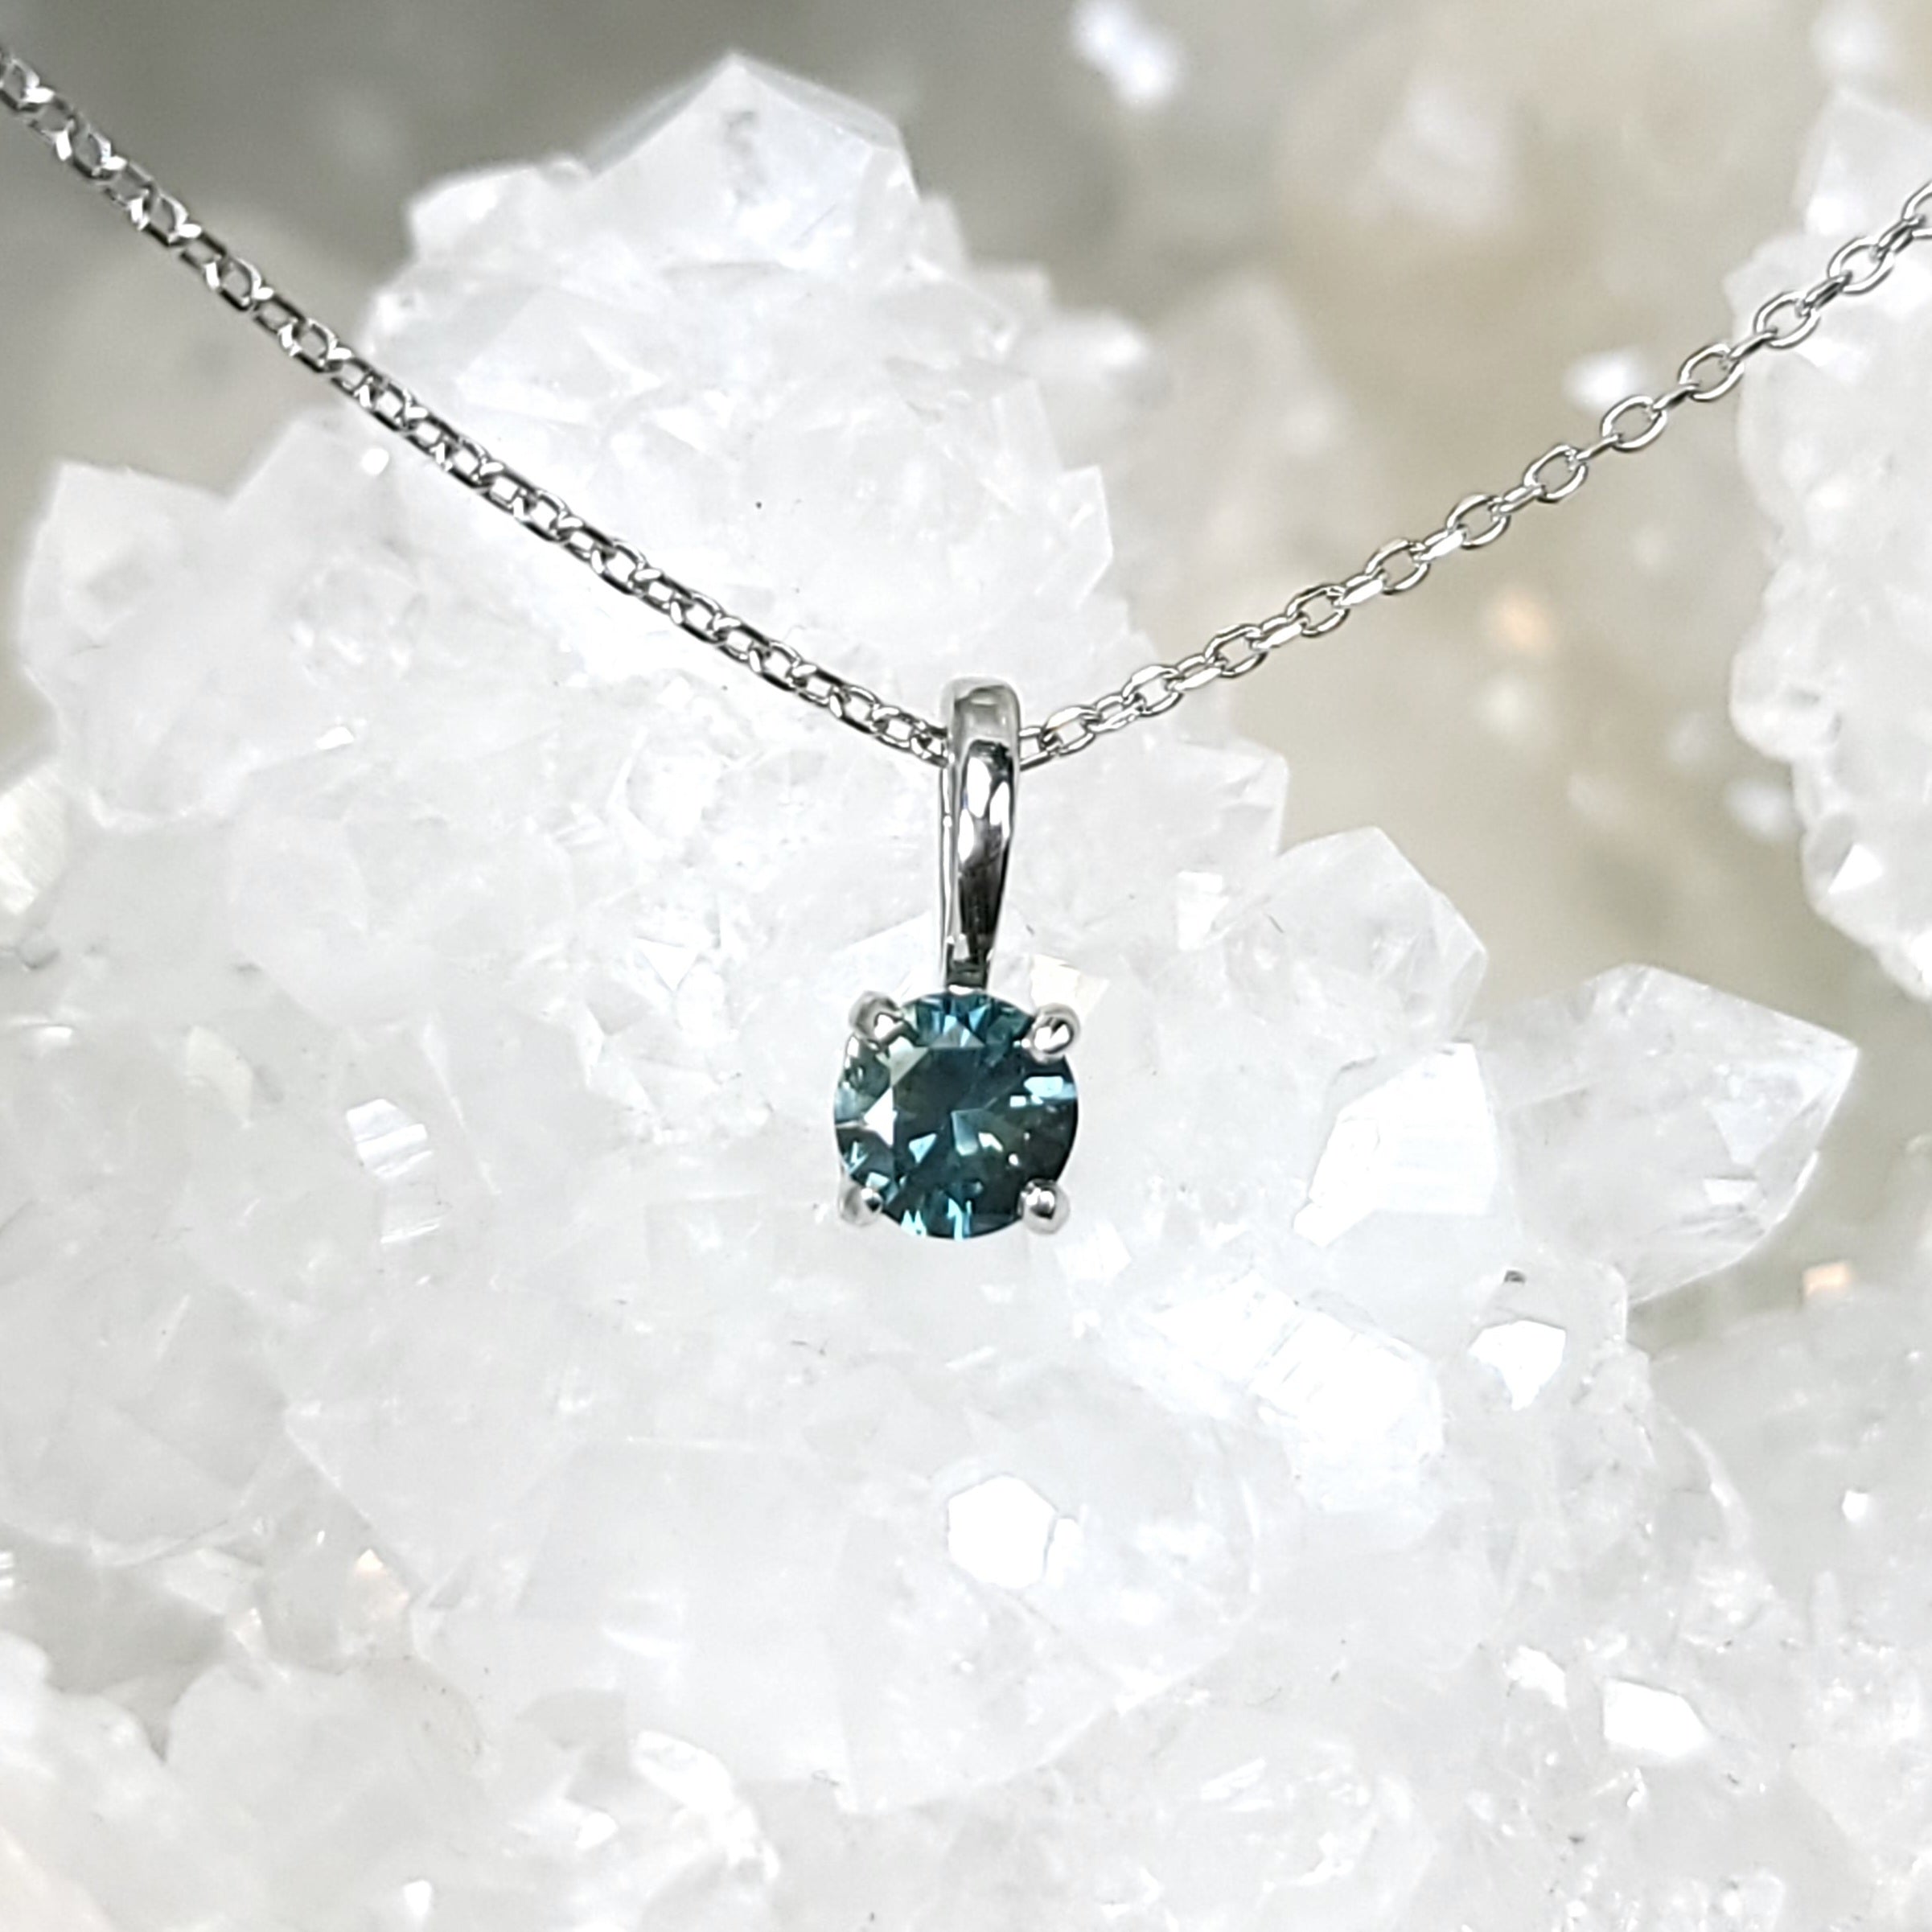 Pendant - Montana Sapphire .45 CT Blue/Teal Round Cut set in 14K White Gold